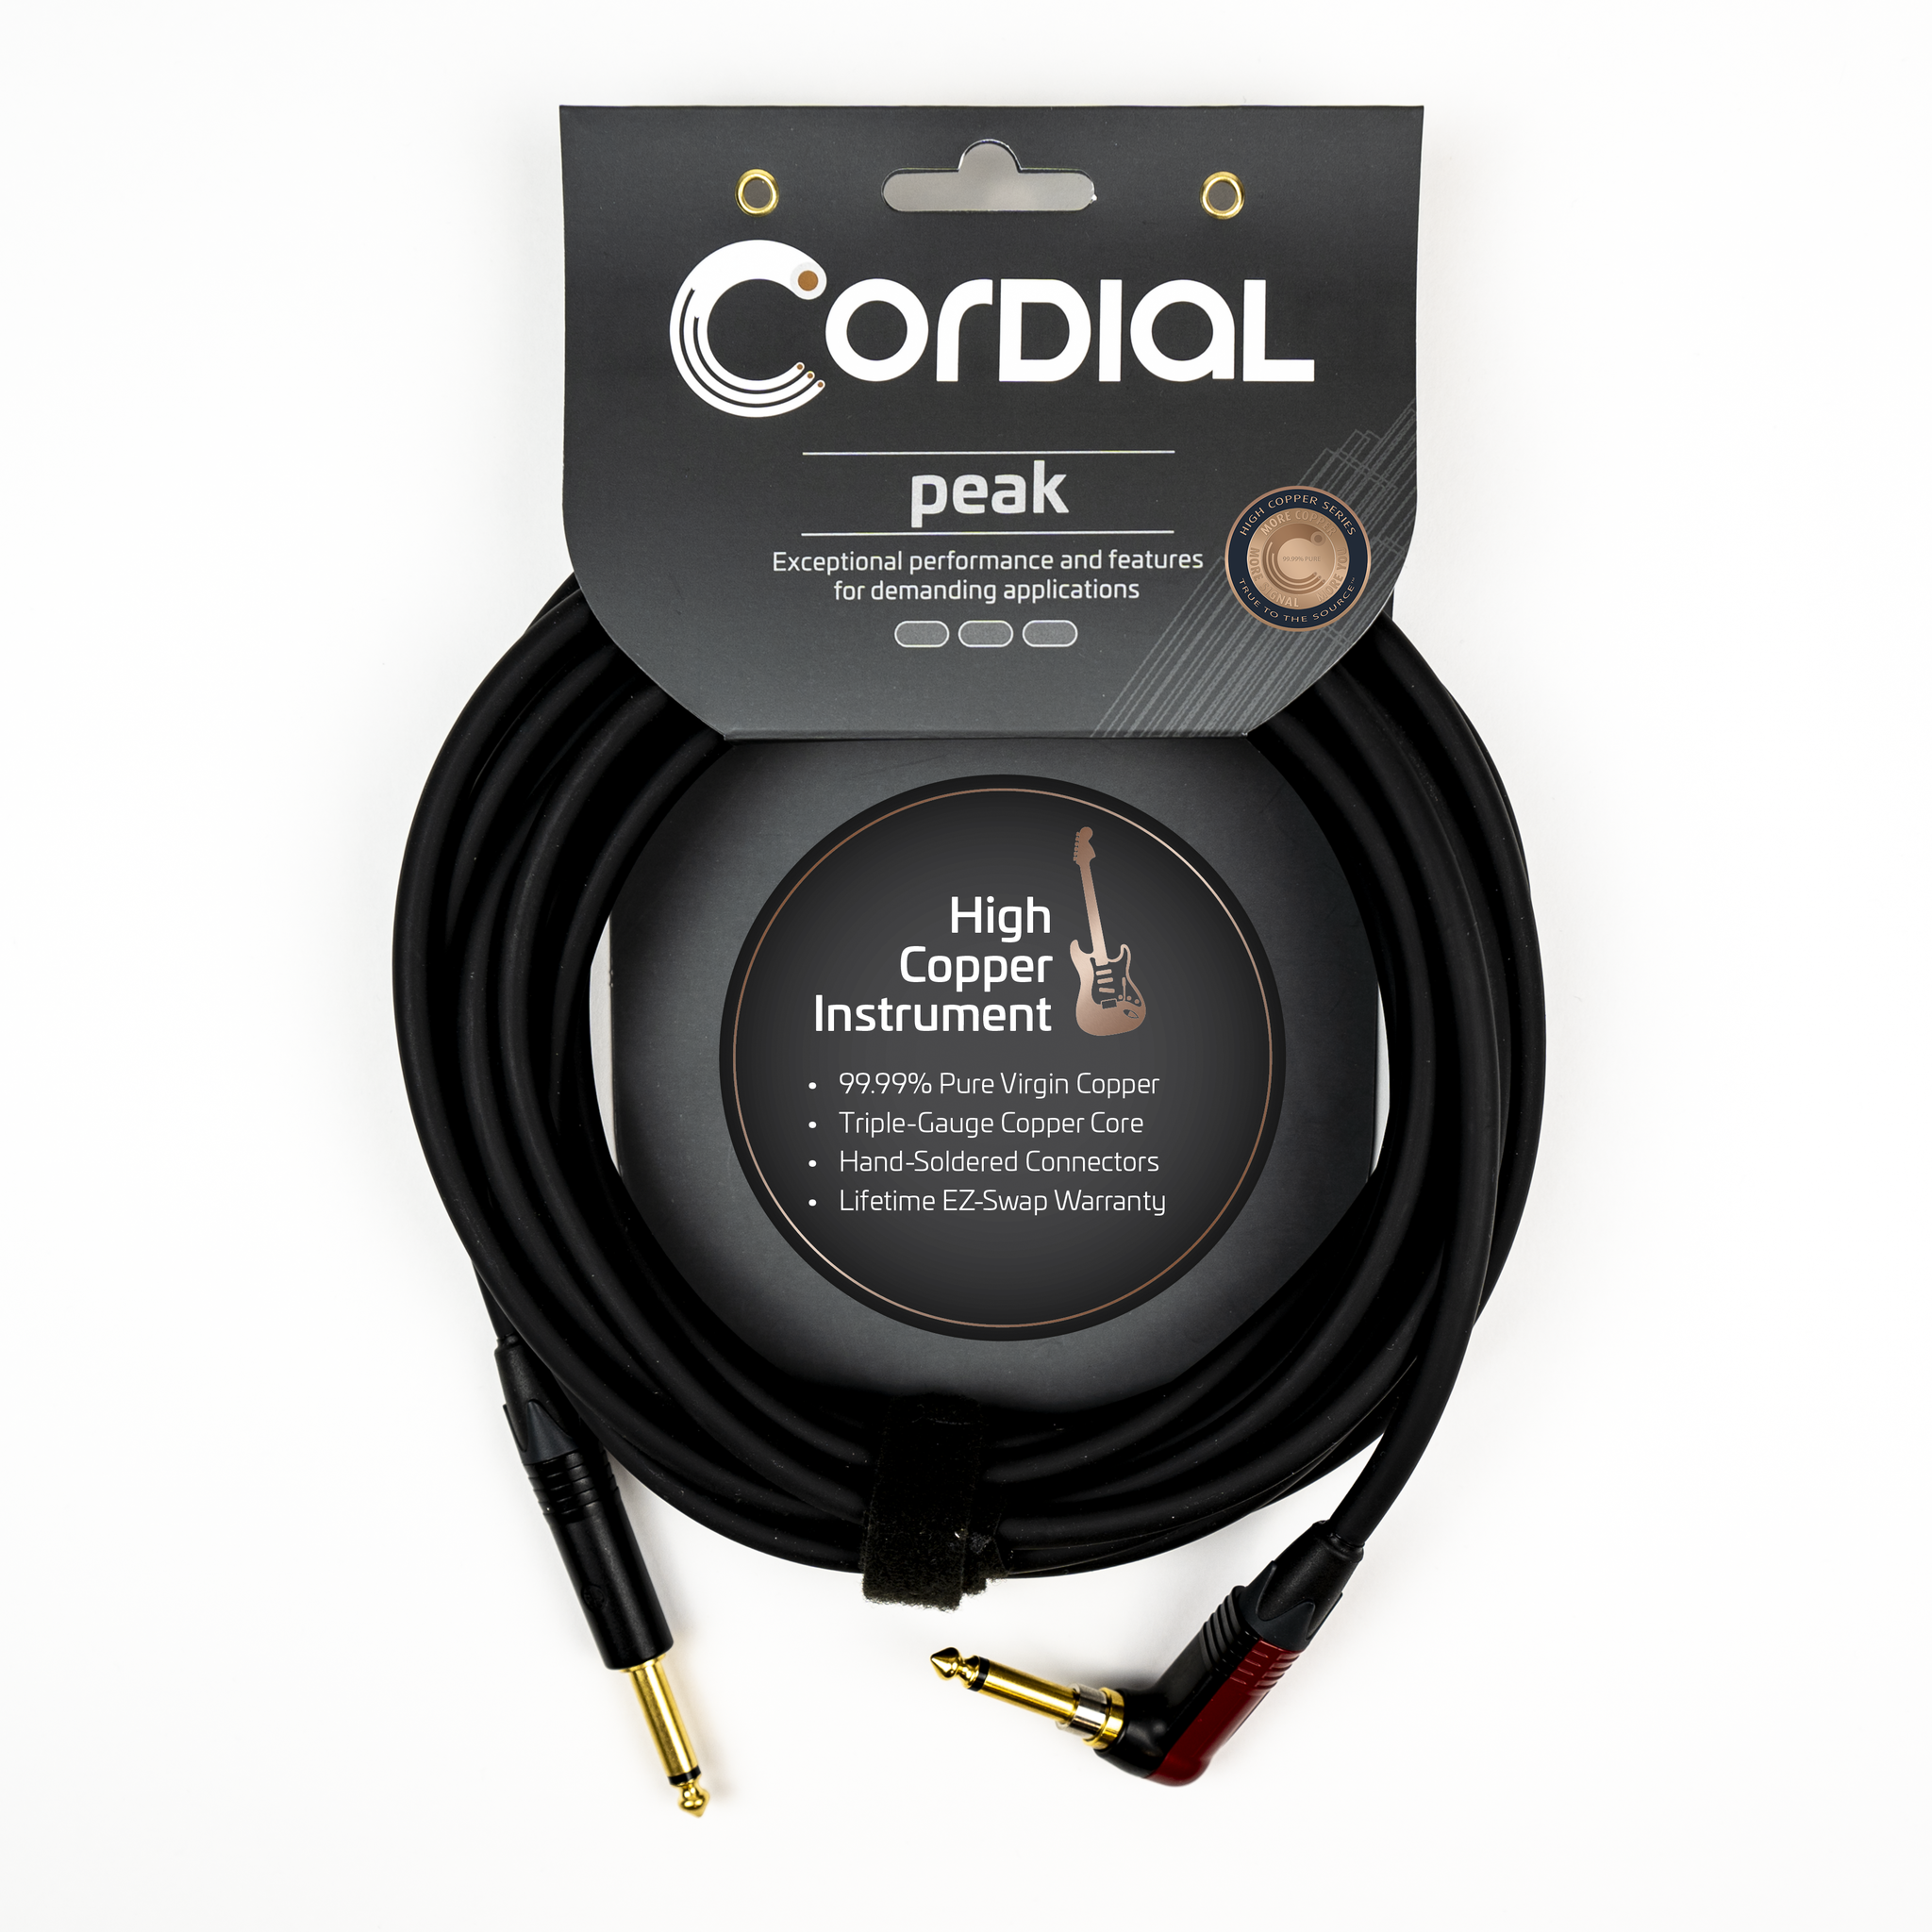 Cordial 3m / 6ft Premium Instrument High-Copper Silent Plug Cable, Peak Series - 1/4'' Straight to 1/4'' Right Angle Silent Plug (CSI 3 RP-SILENT)